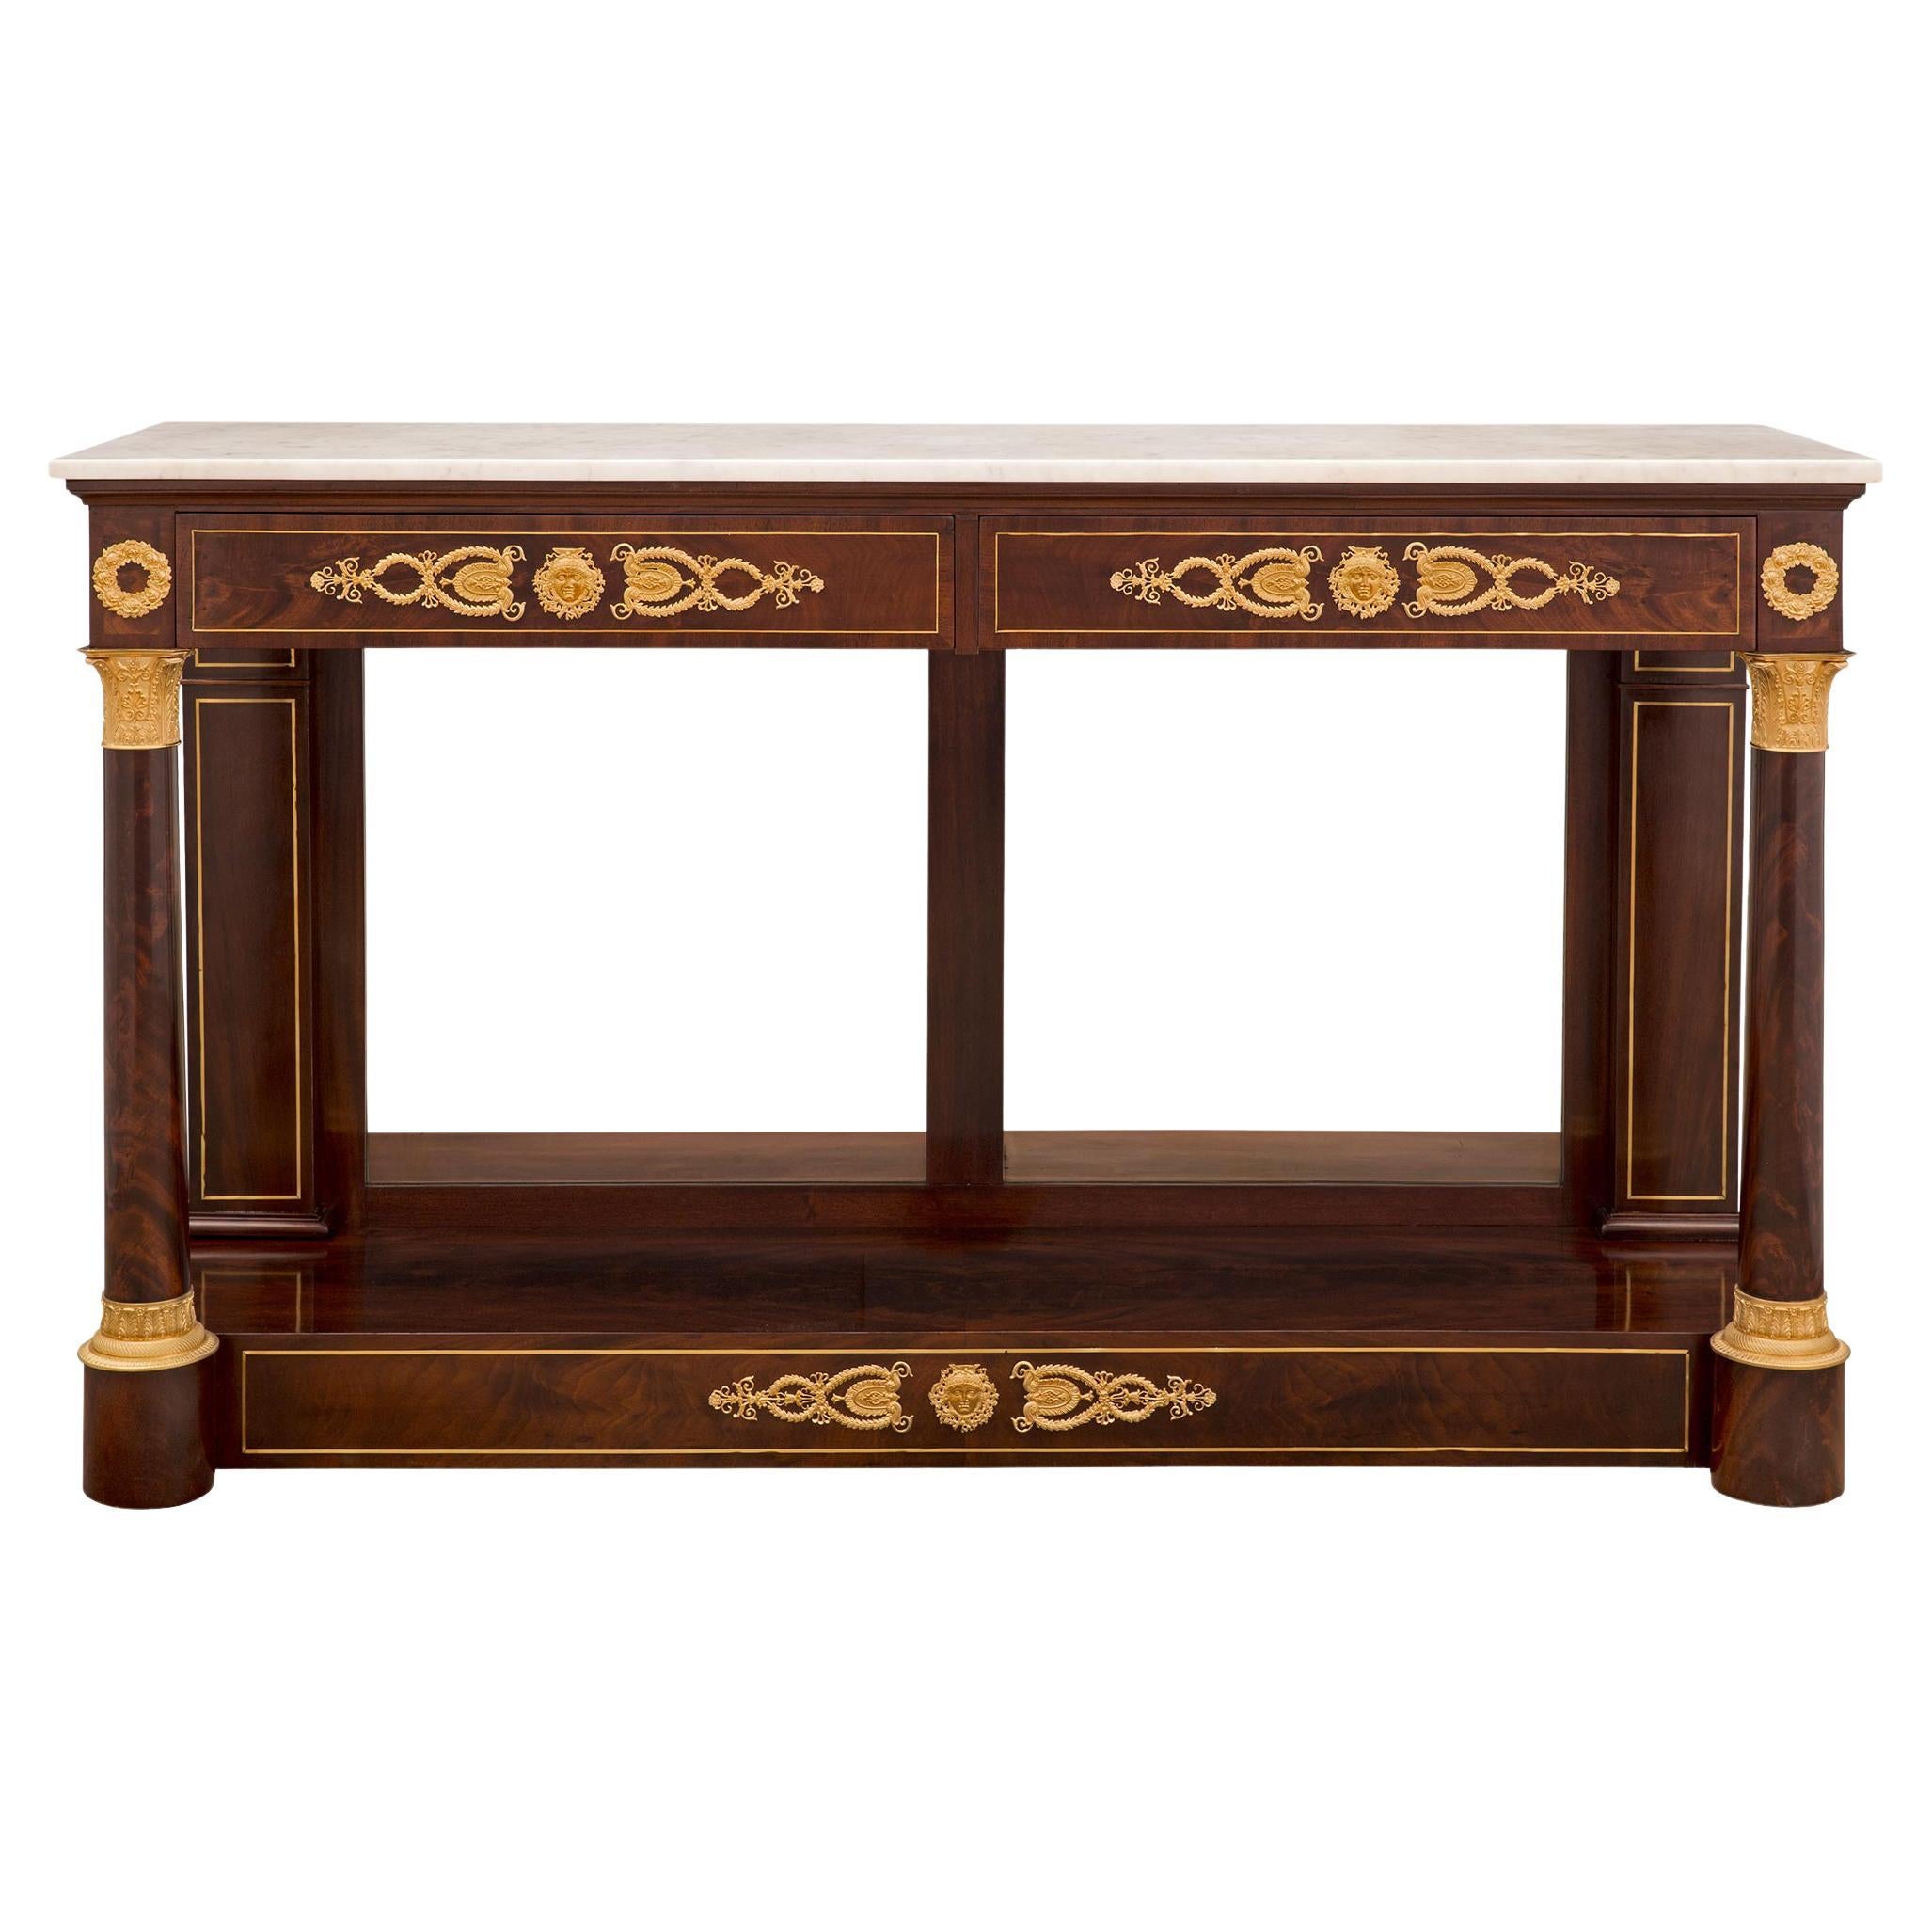 French 19th Century 1st Empire Period Mahogany, Marble, and Ormolu Console For Sale